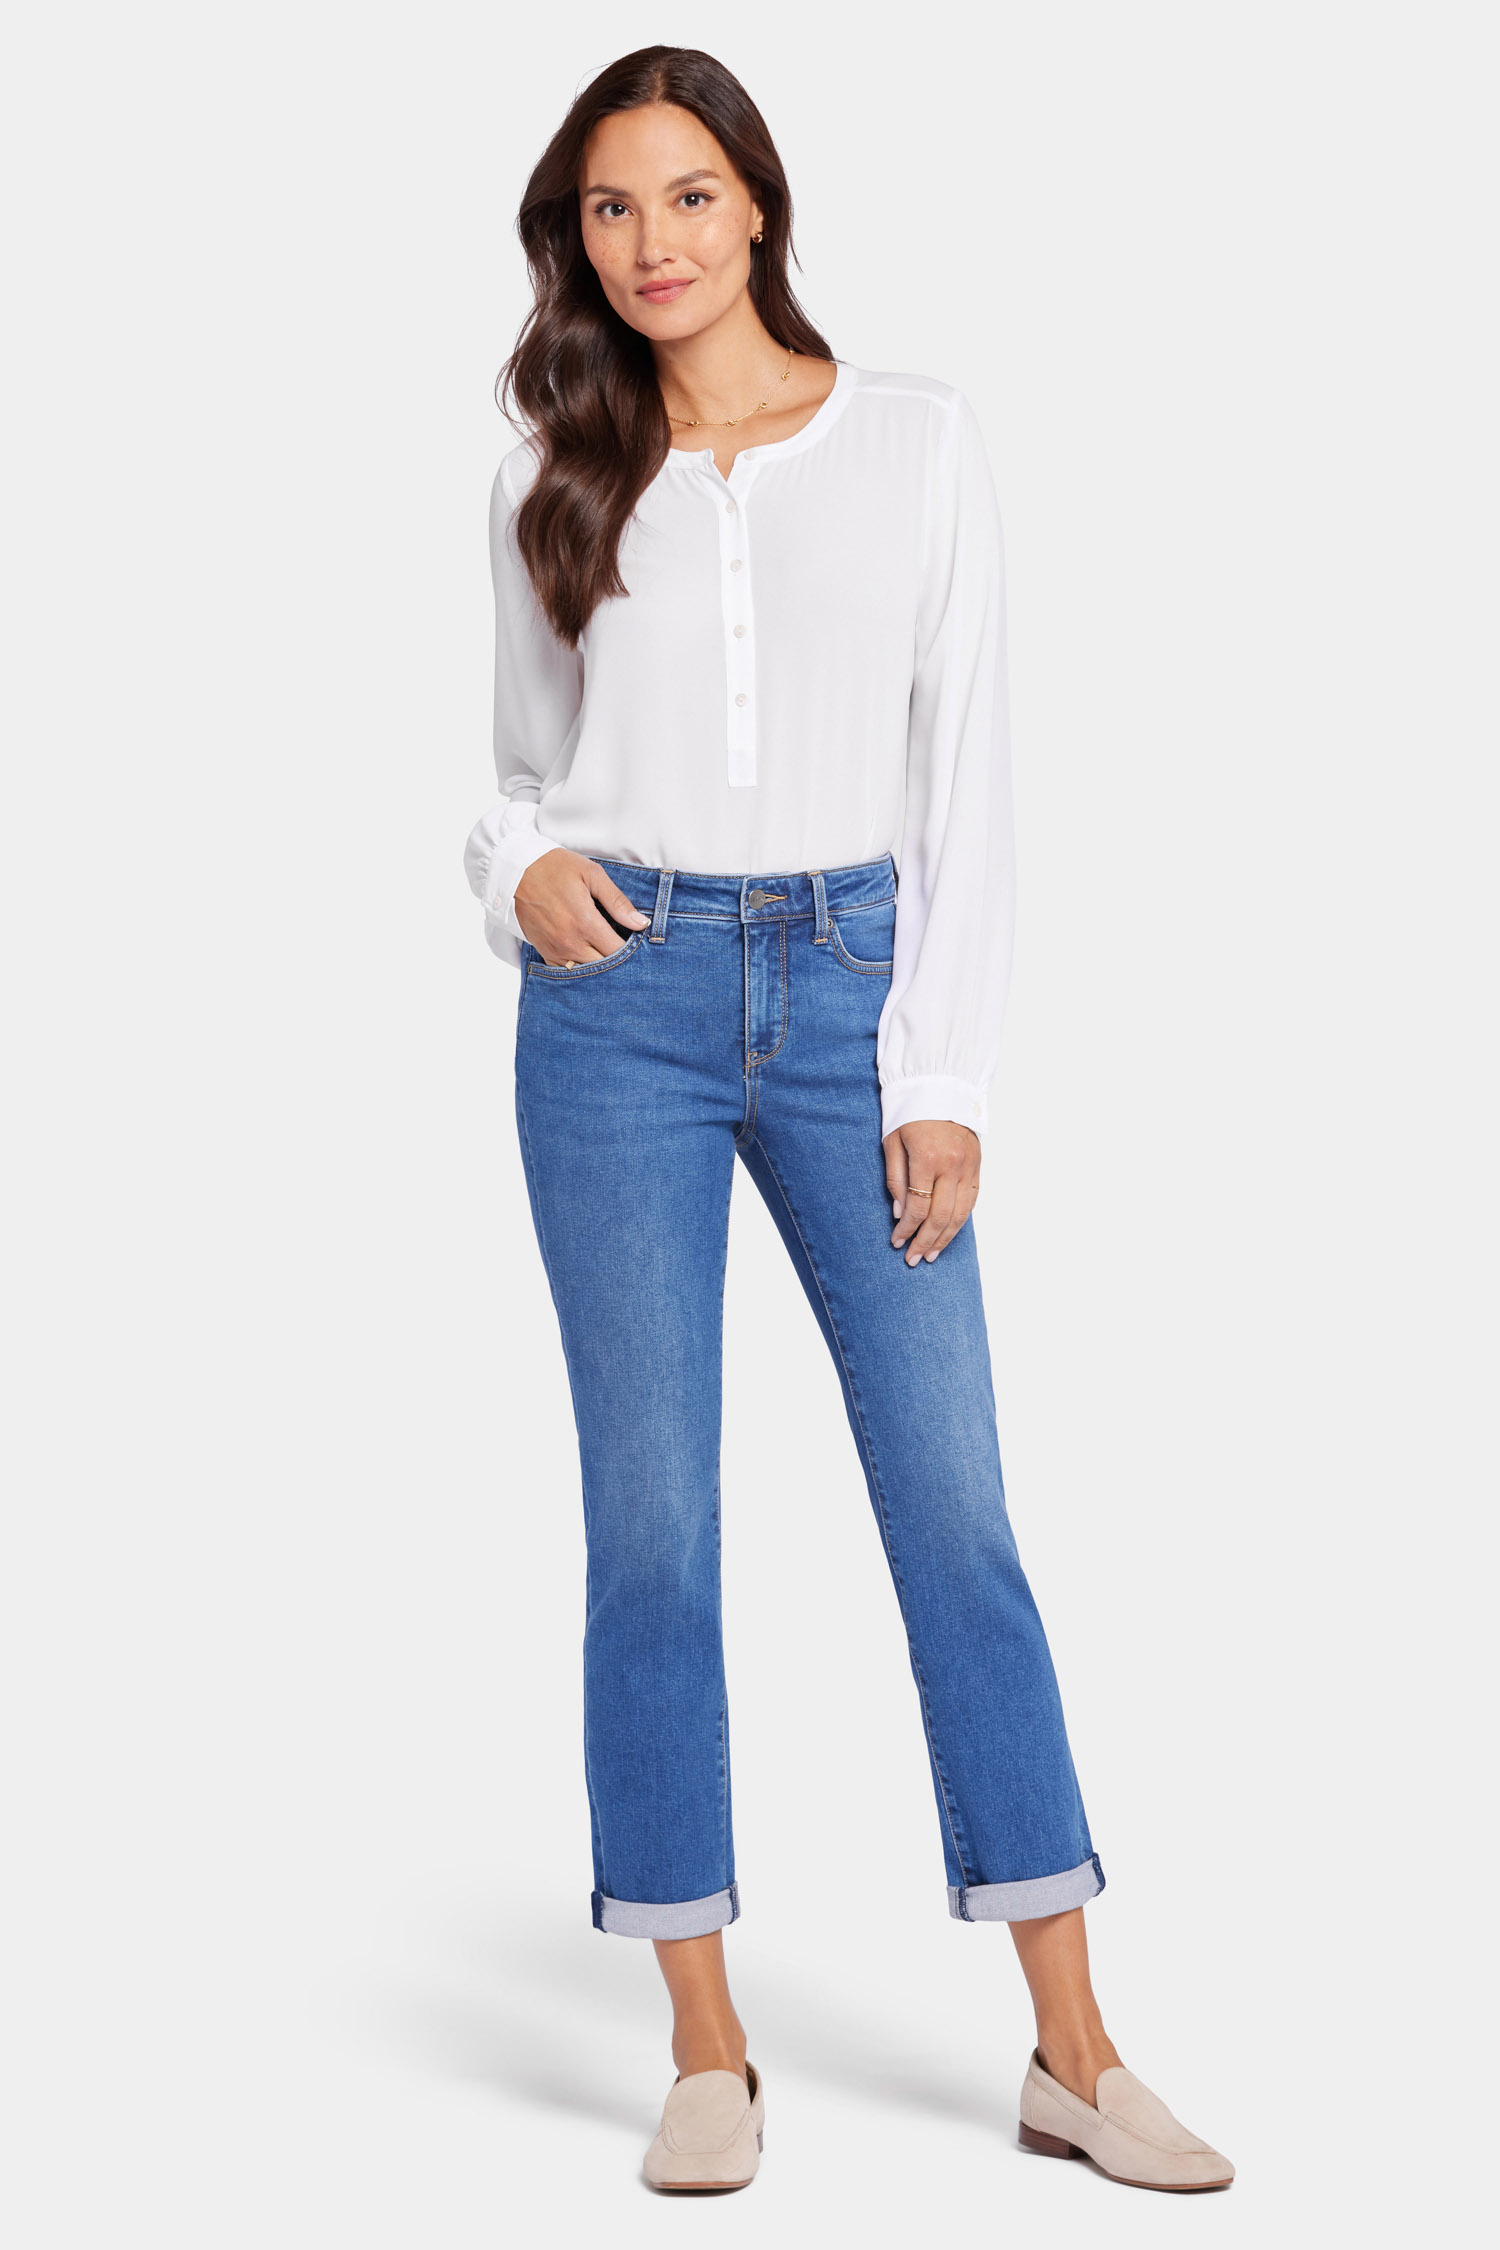 Women's Petite Bootcut & Flared Jeans - Ankle & Slim